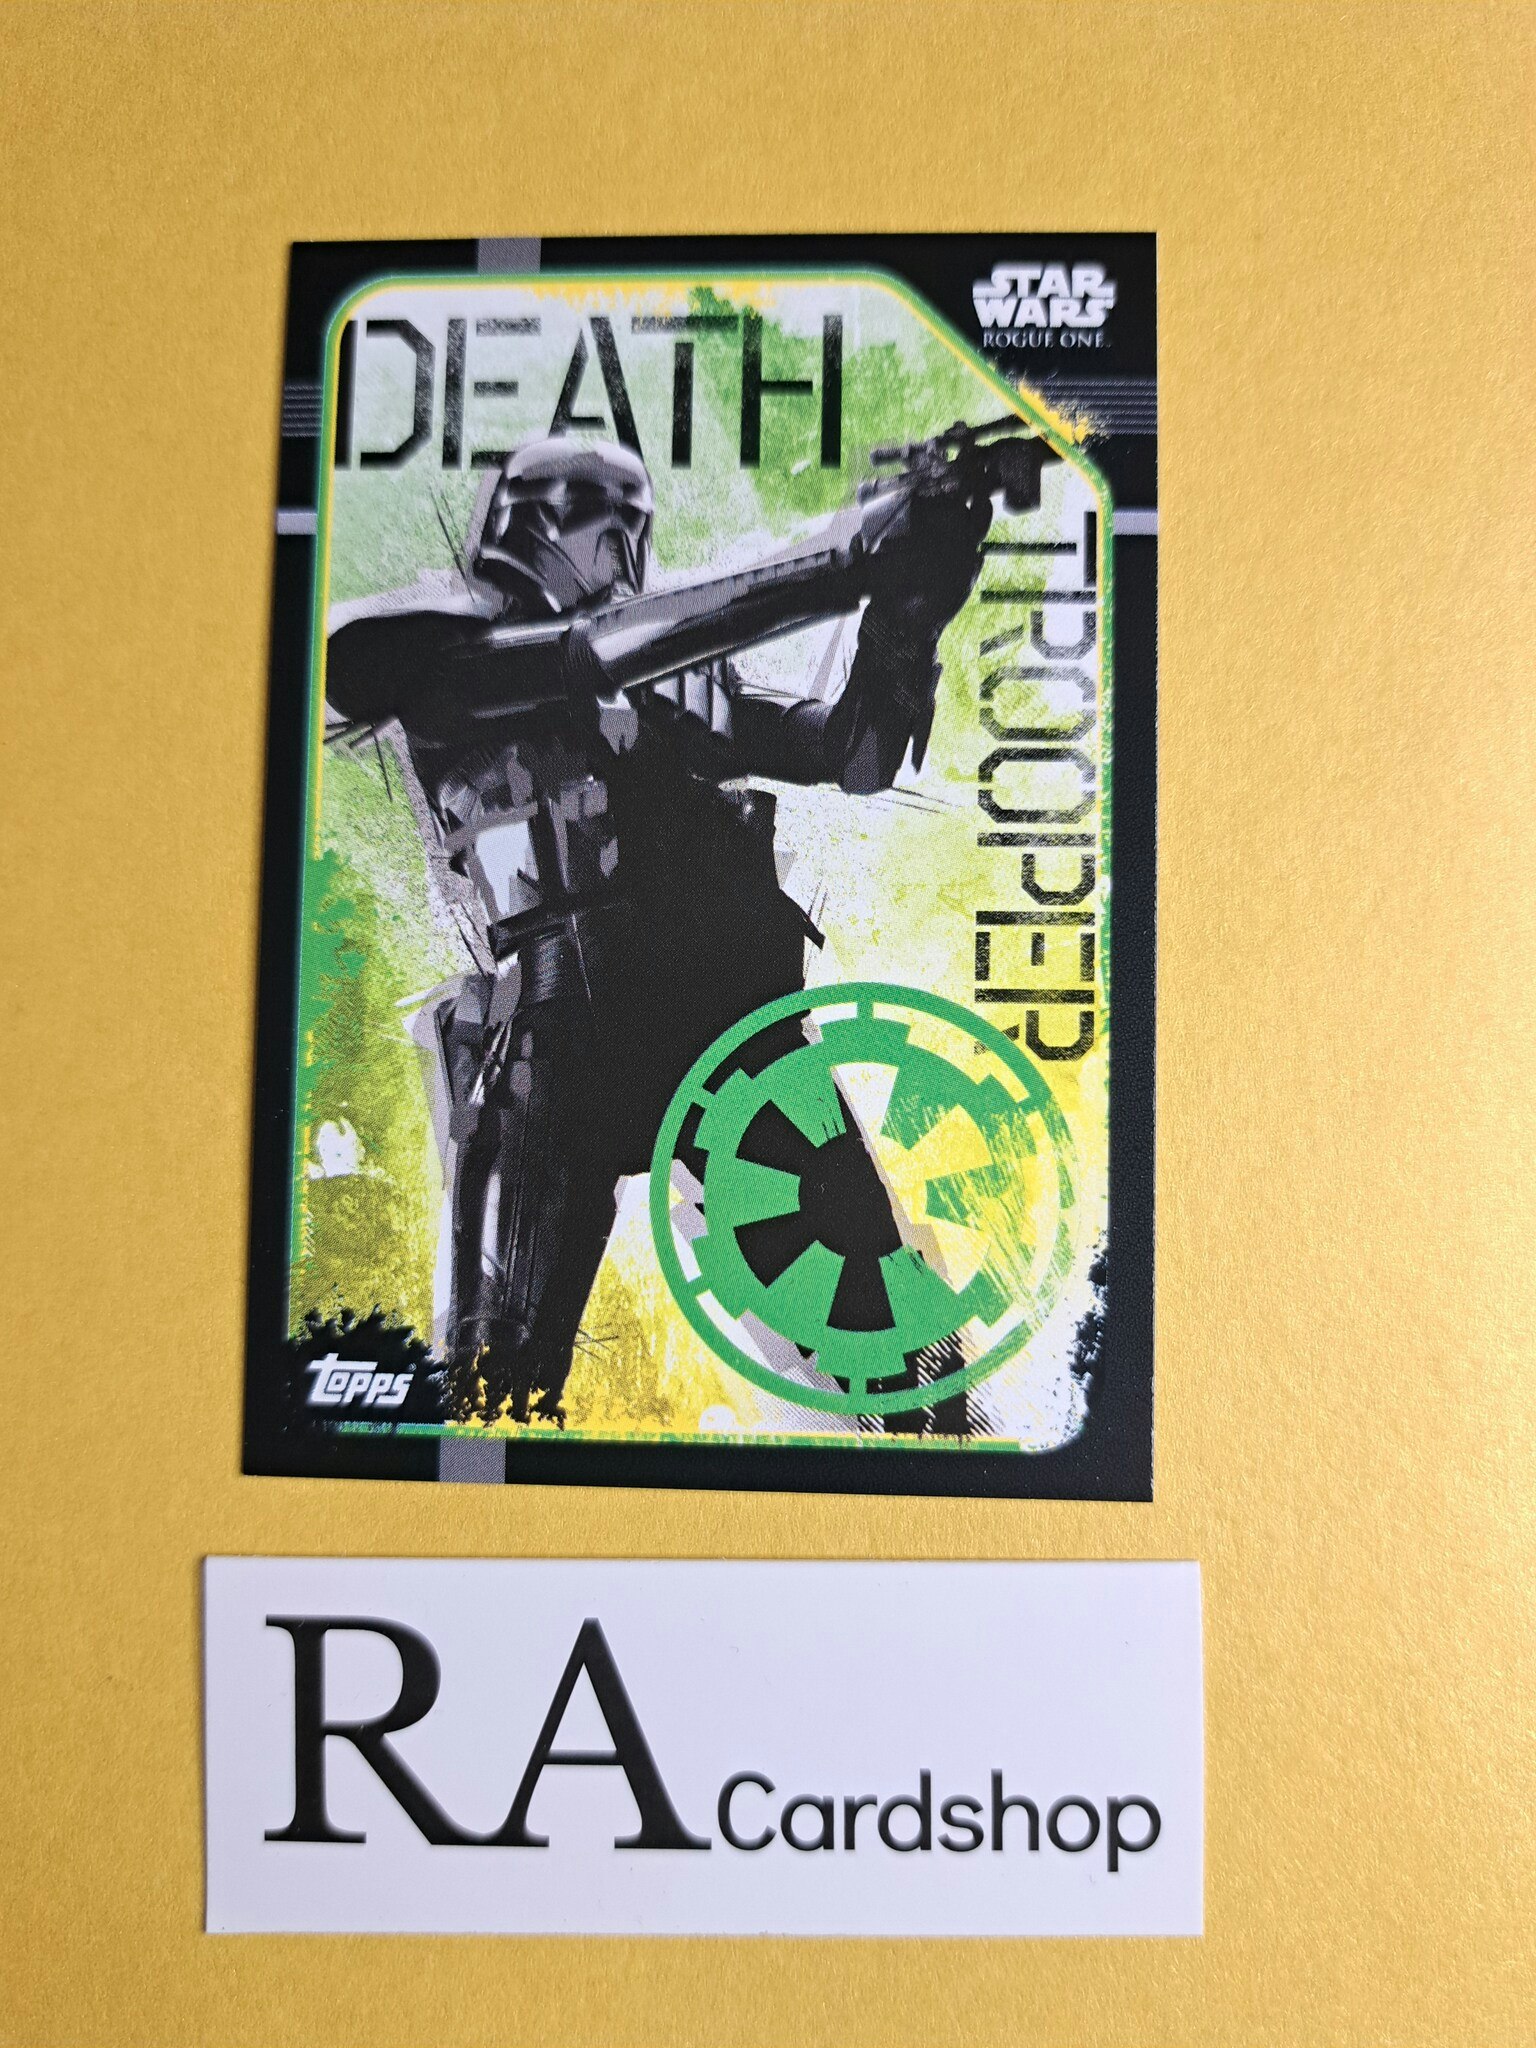 Death Trooper #59 Rogue One Topps Star Wars